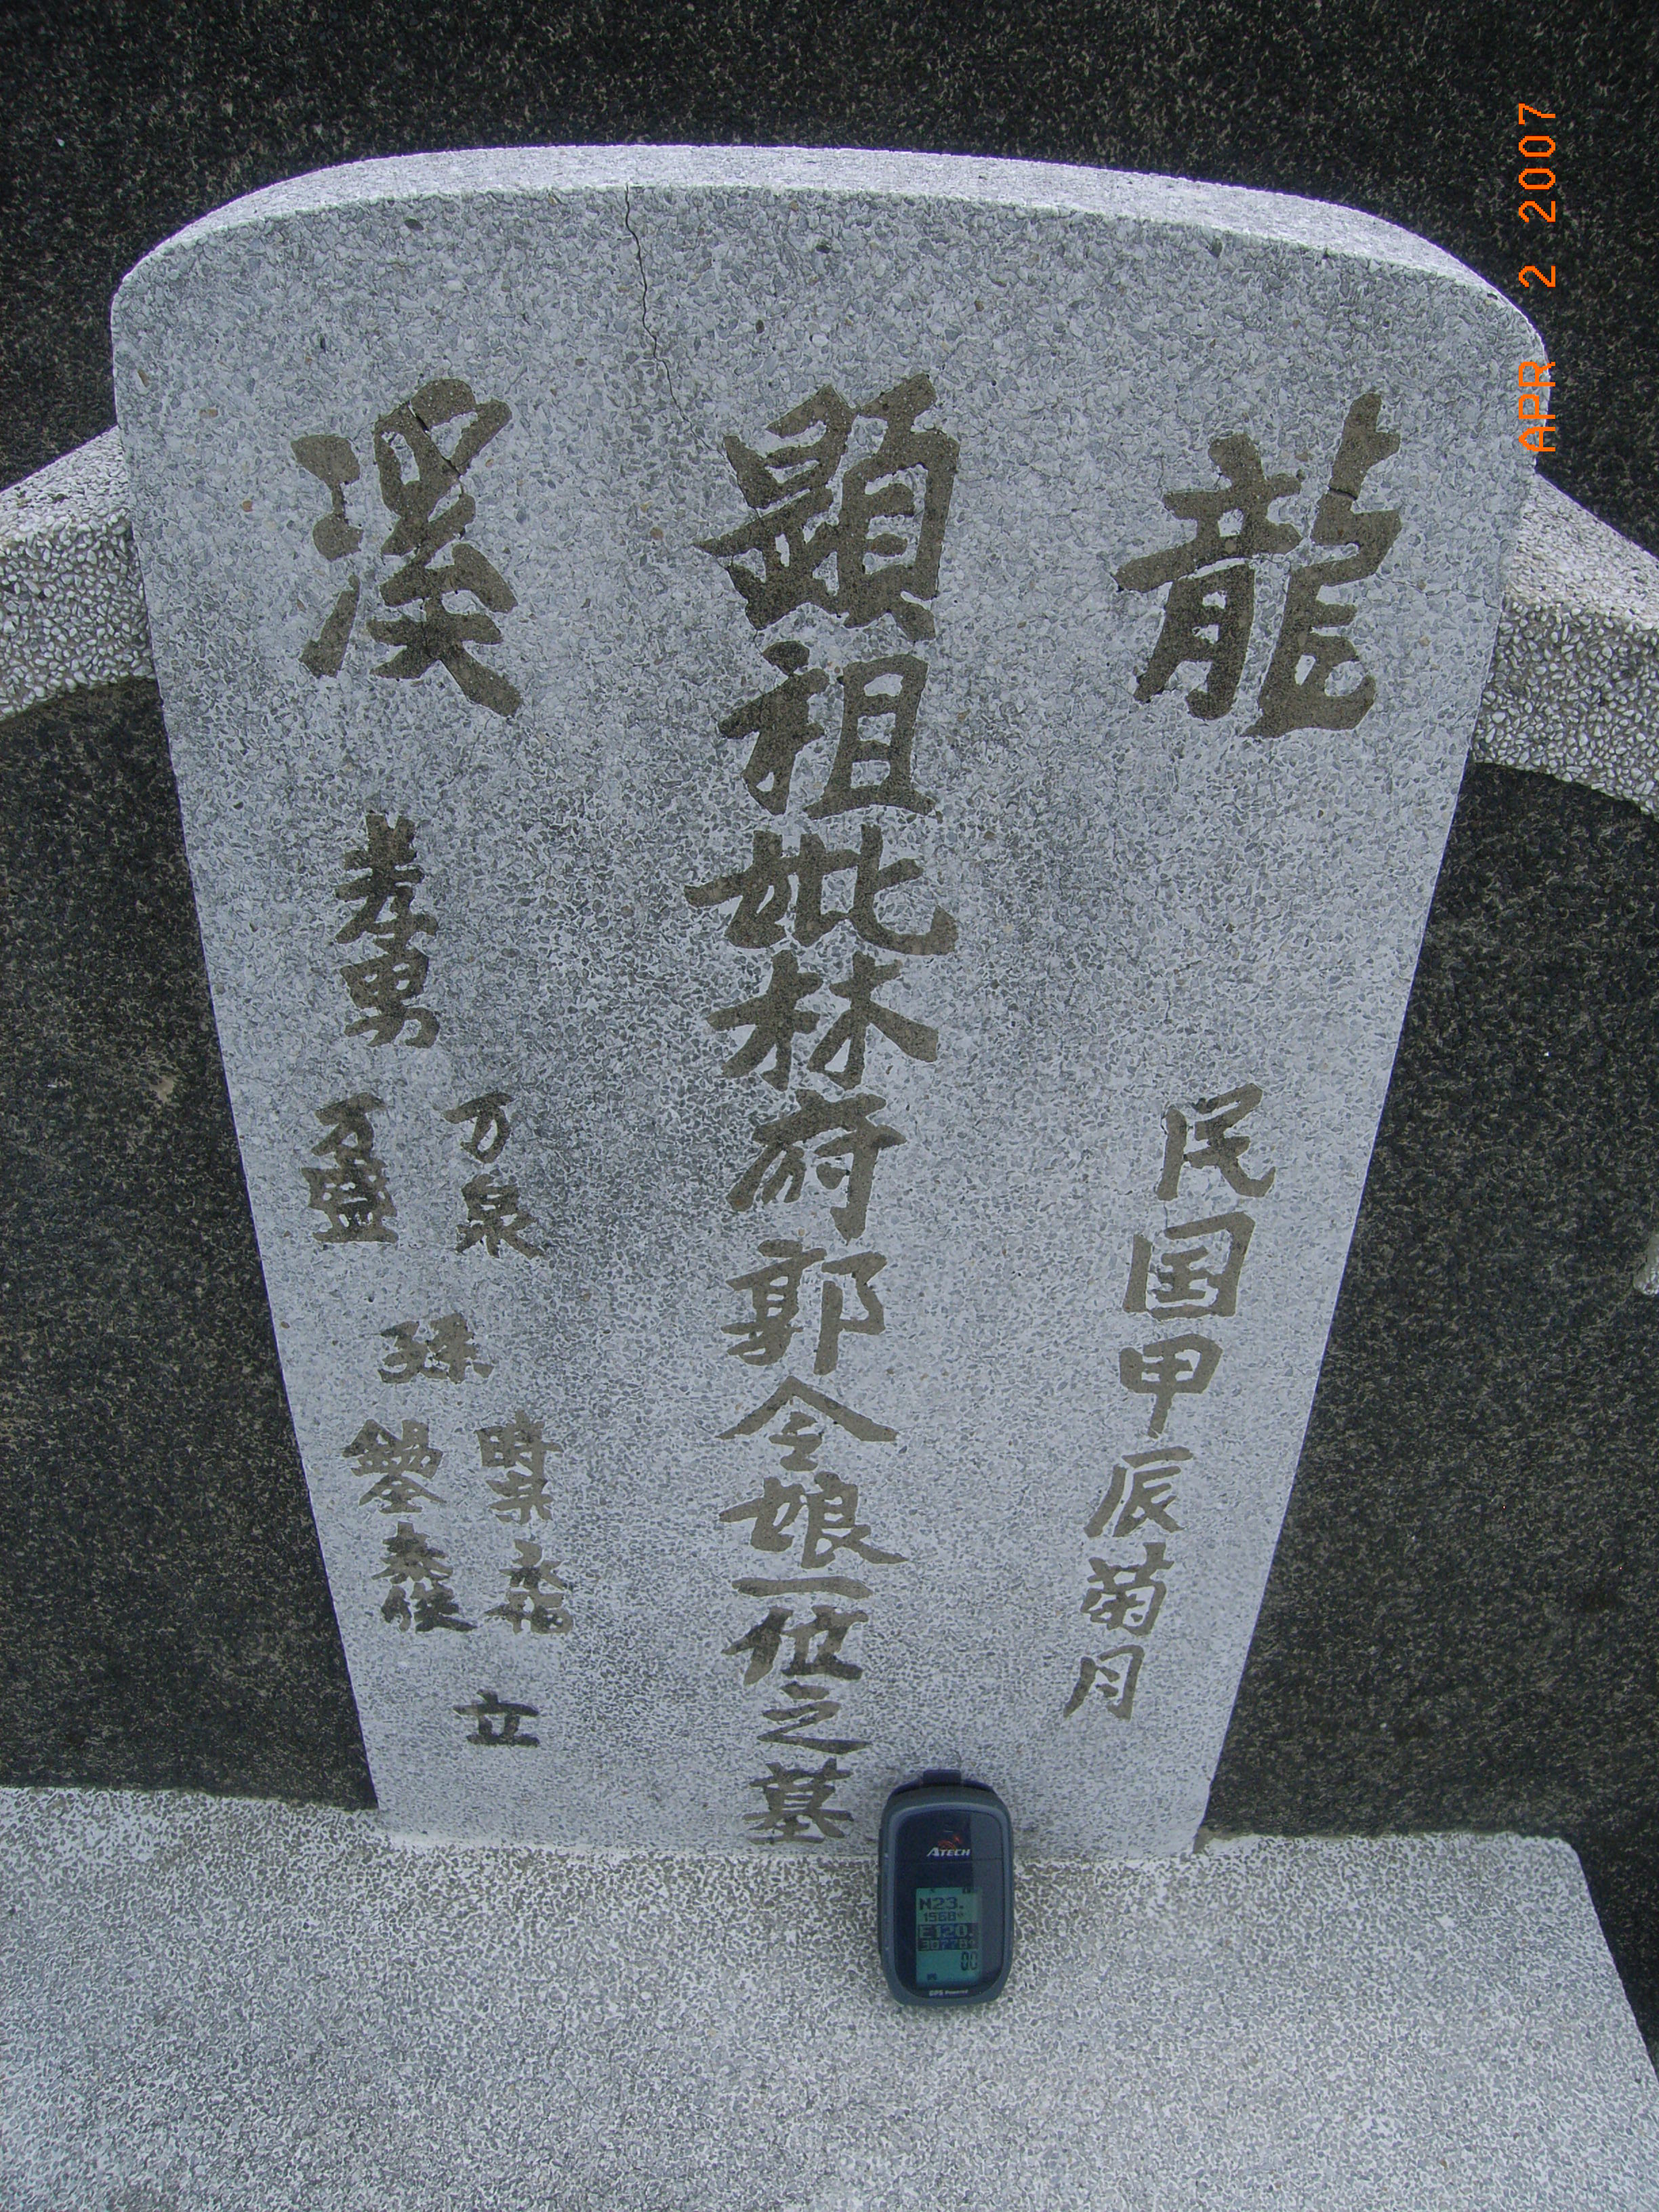 Tombstone of 林 (LIN2) family at Taiwan, Tainanxian, Xinshixiang, private site. The tombstone-ID is 15038; 台灣，台南縣，新市鎮，私有地，林姓之墓碑。